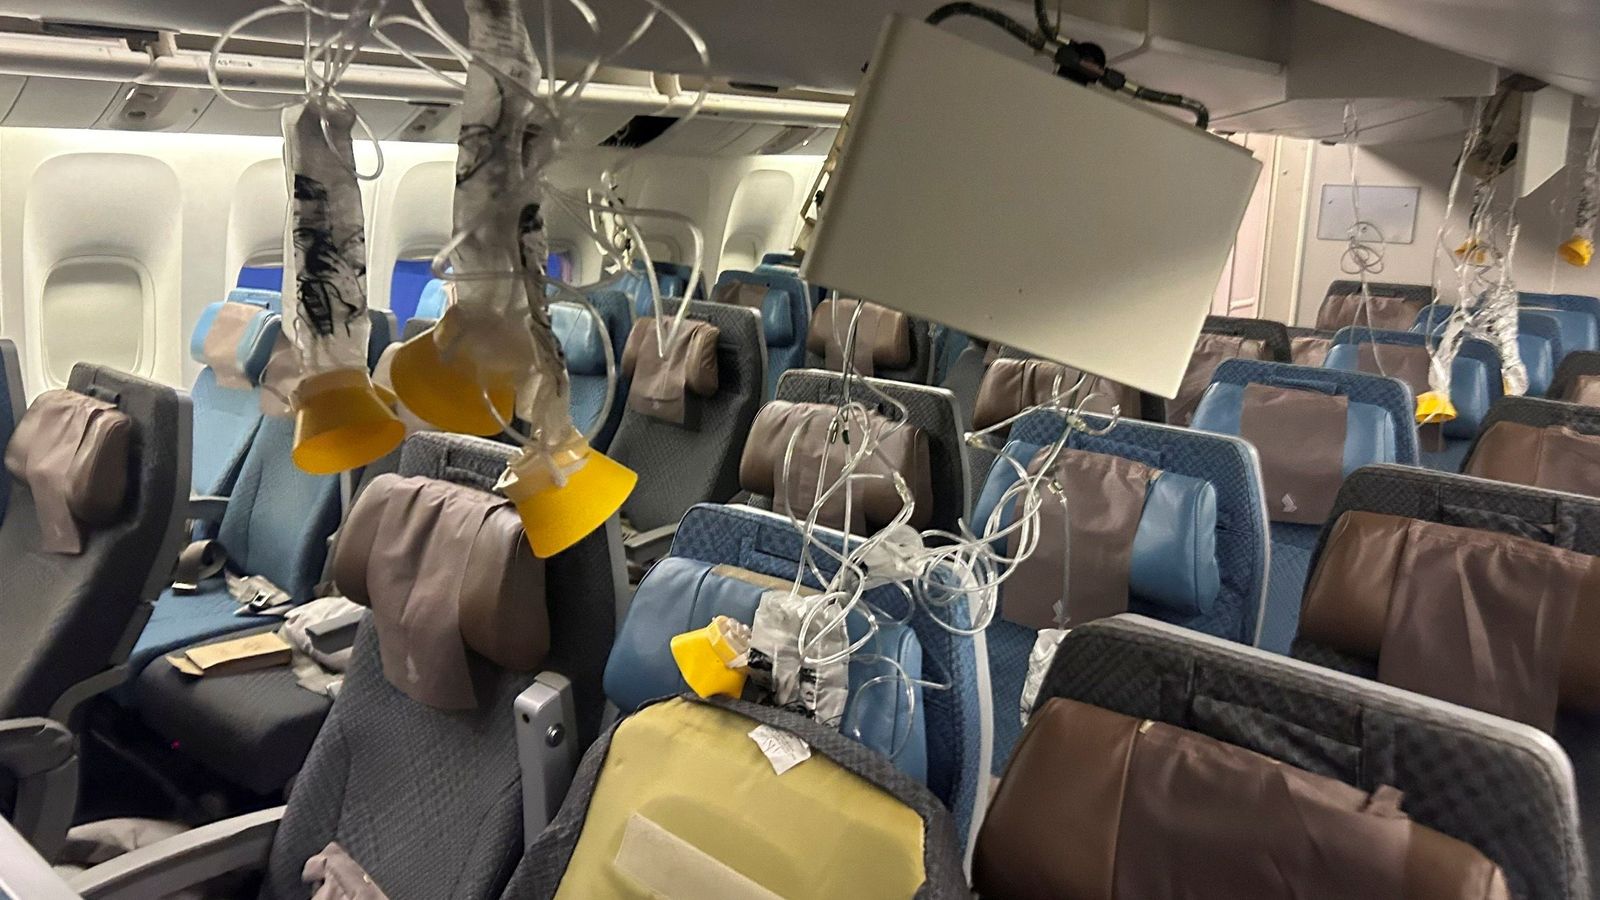 Images show damage inside Singapore Airlines plane after one killed in turbulence